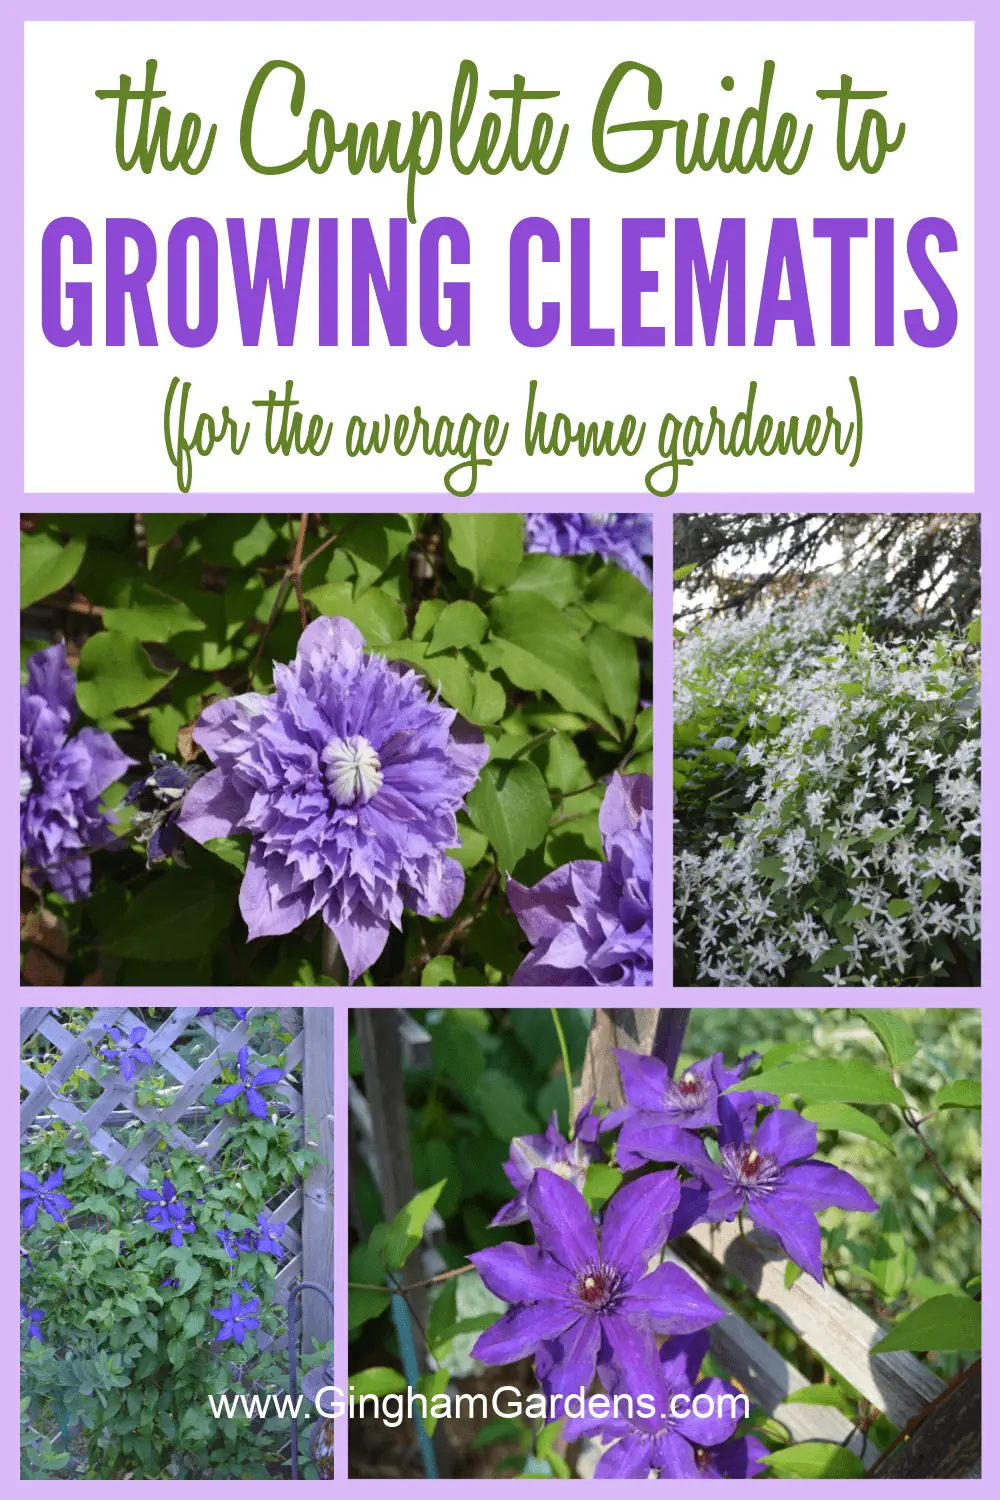 Images of clematis flowers with text overlay - growing clematis for the average home gardener